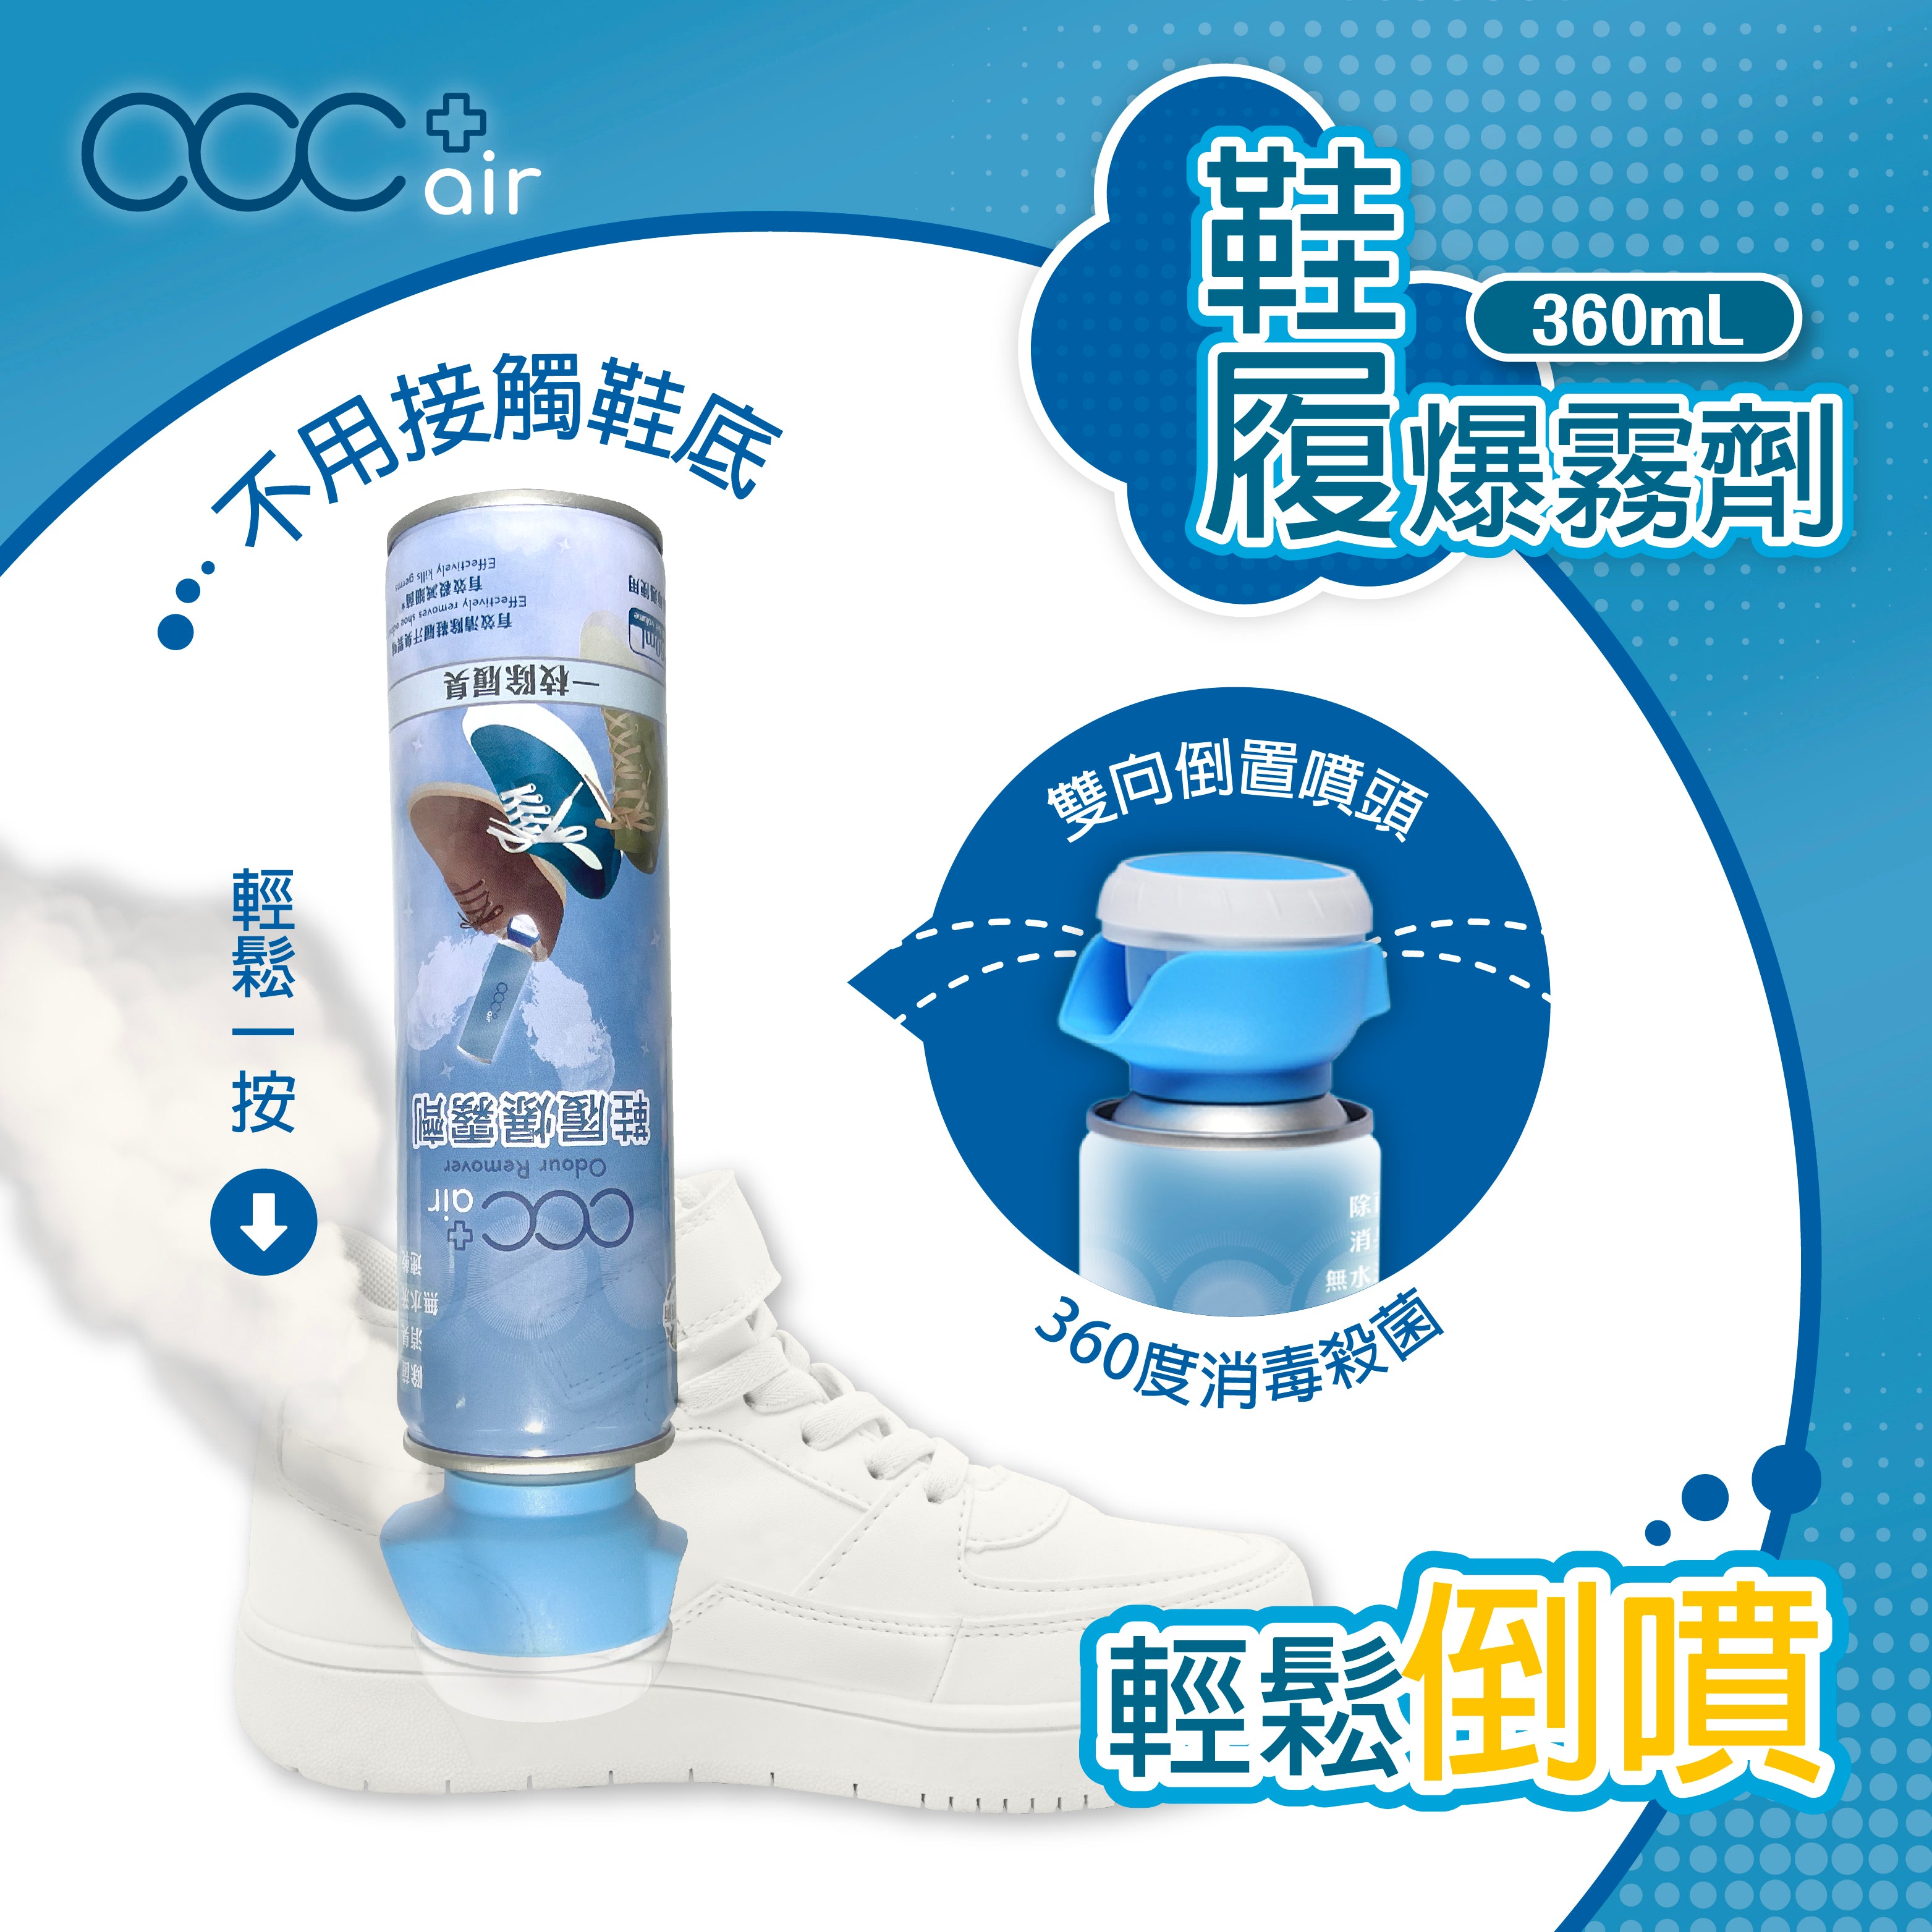 acc+ air shoe blasting agent is available in Japantown/Abutai/HKTVmall, effective deodorizing one stick deodorizing shoes